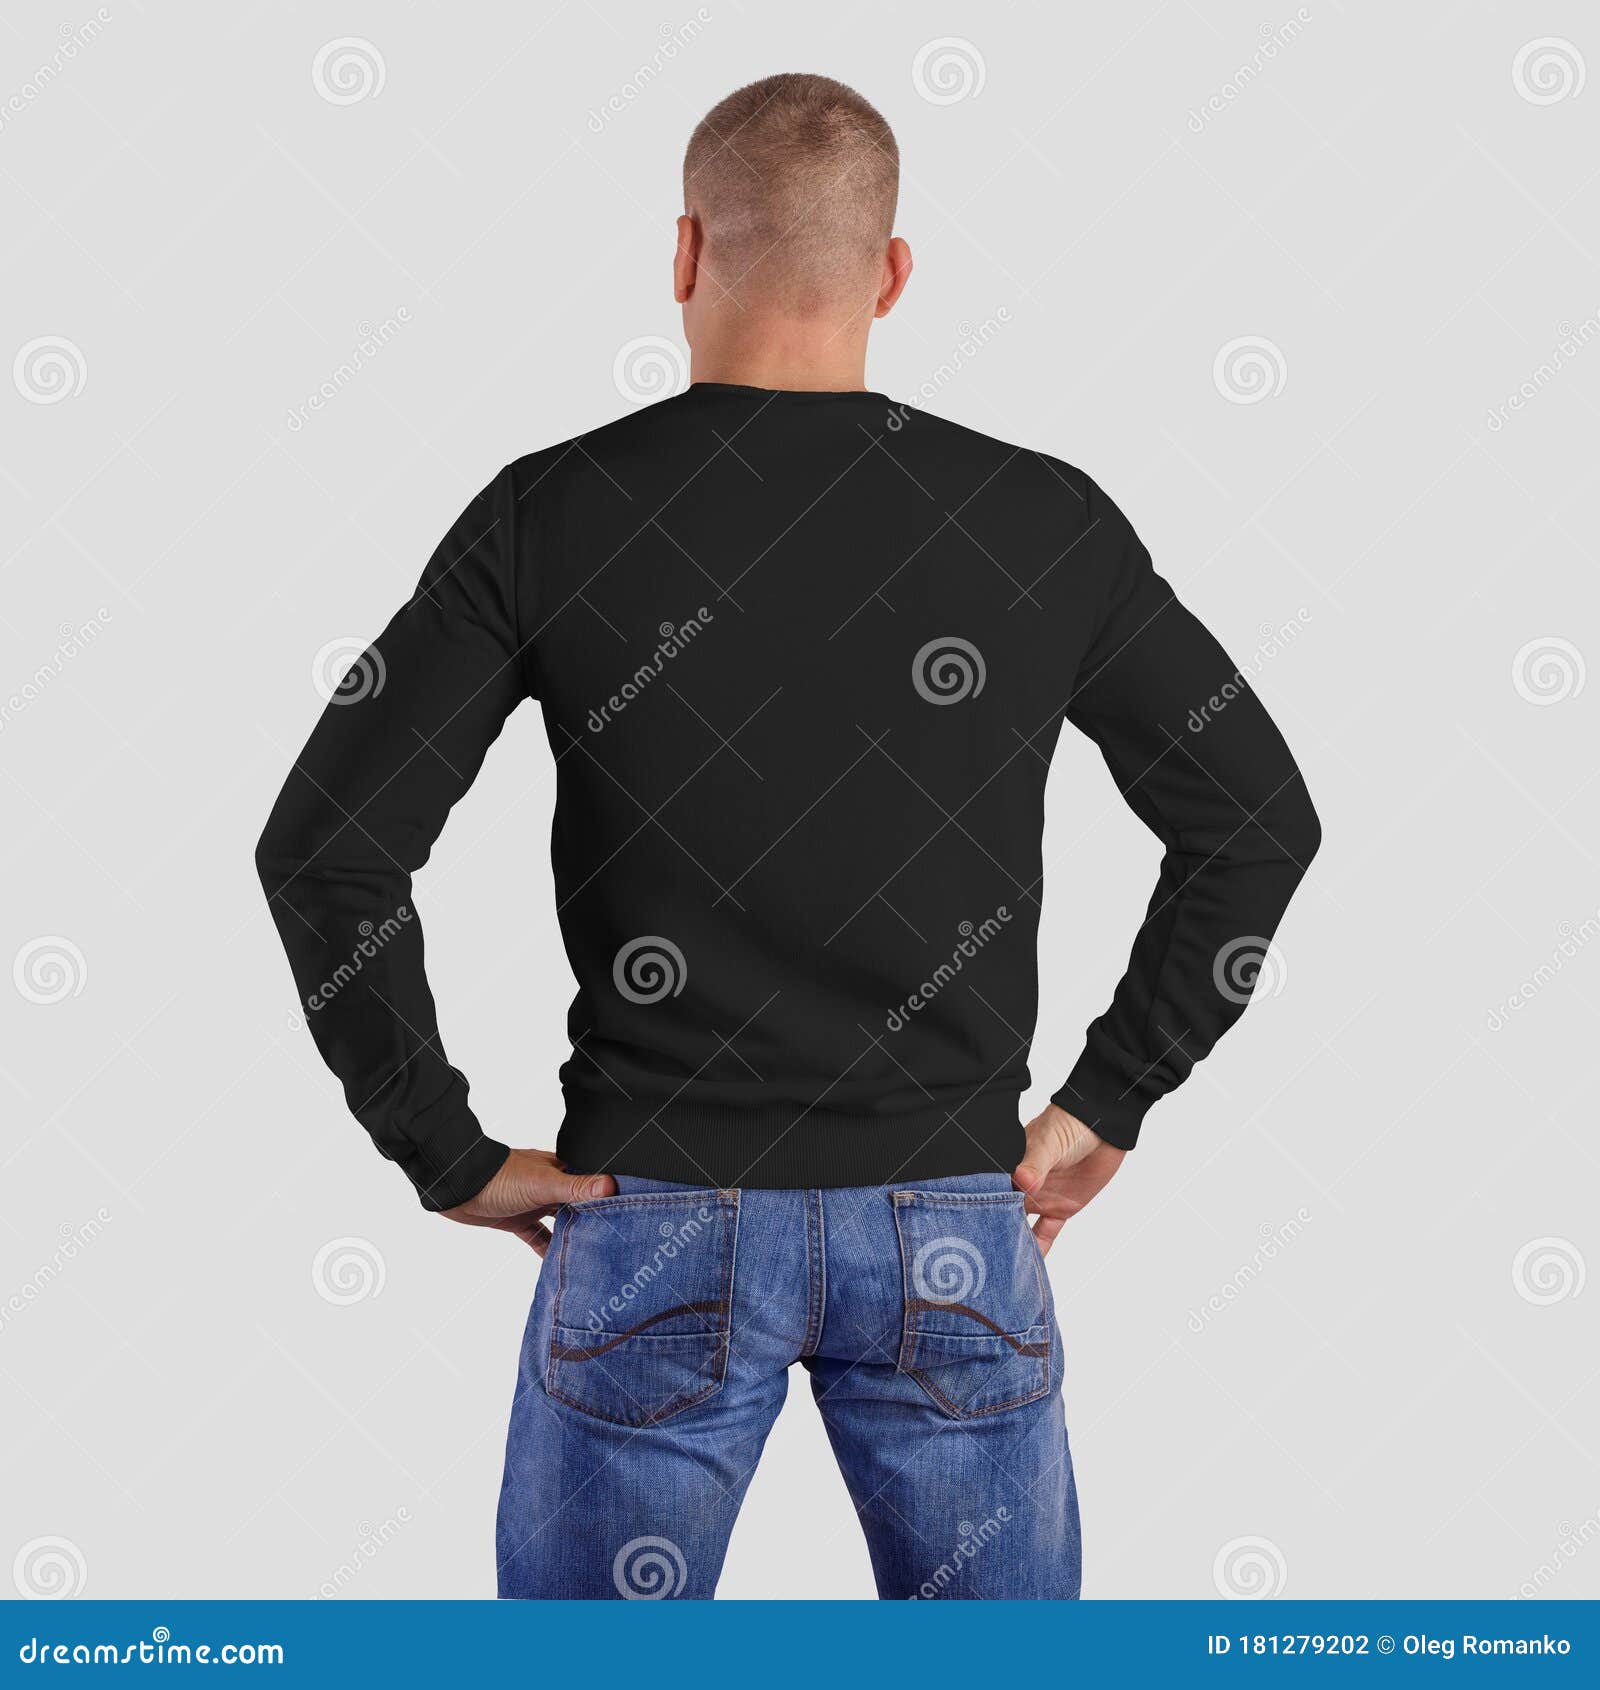 Mockup of Black Male Heather on a Sporty Man in Blue Jeans, Fashion ...